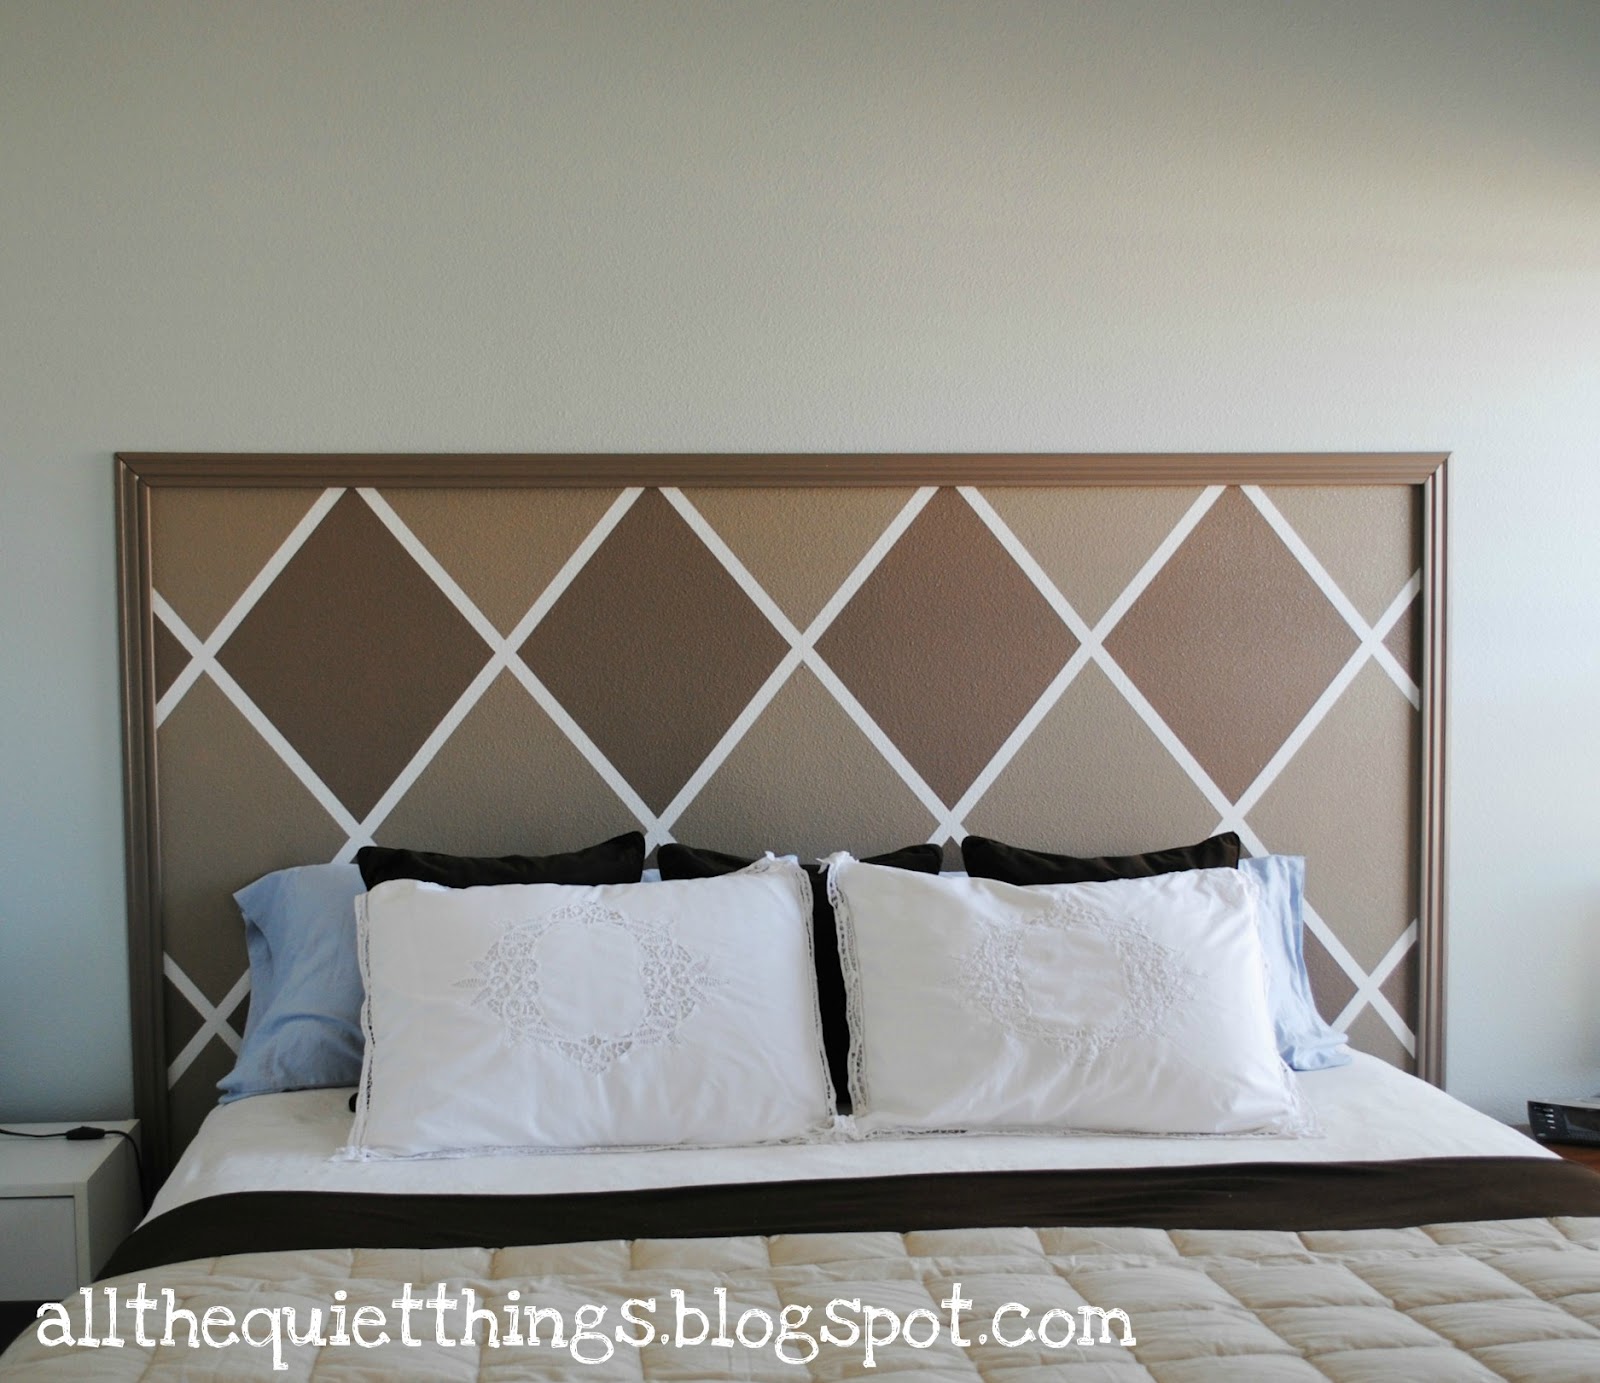 All The Quiet Things: Painted Headboard